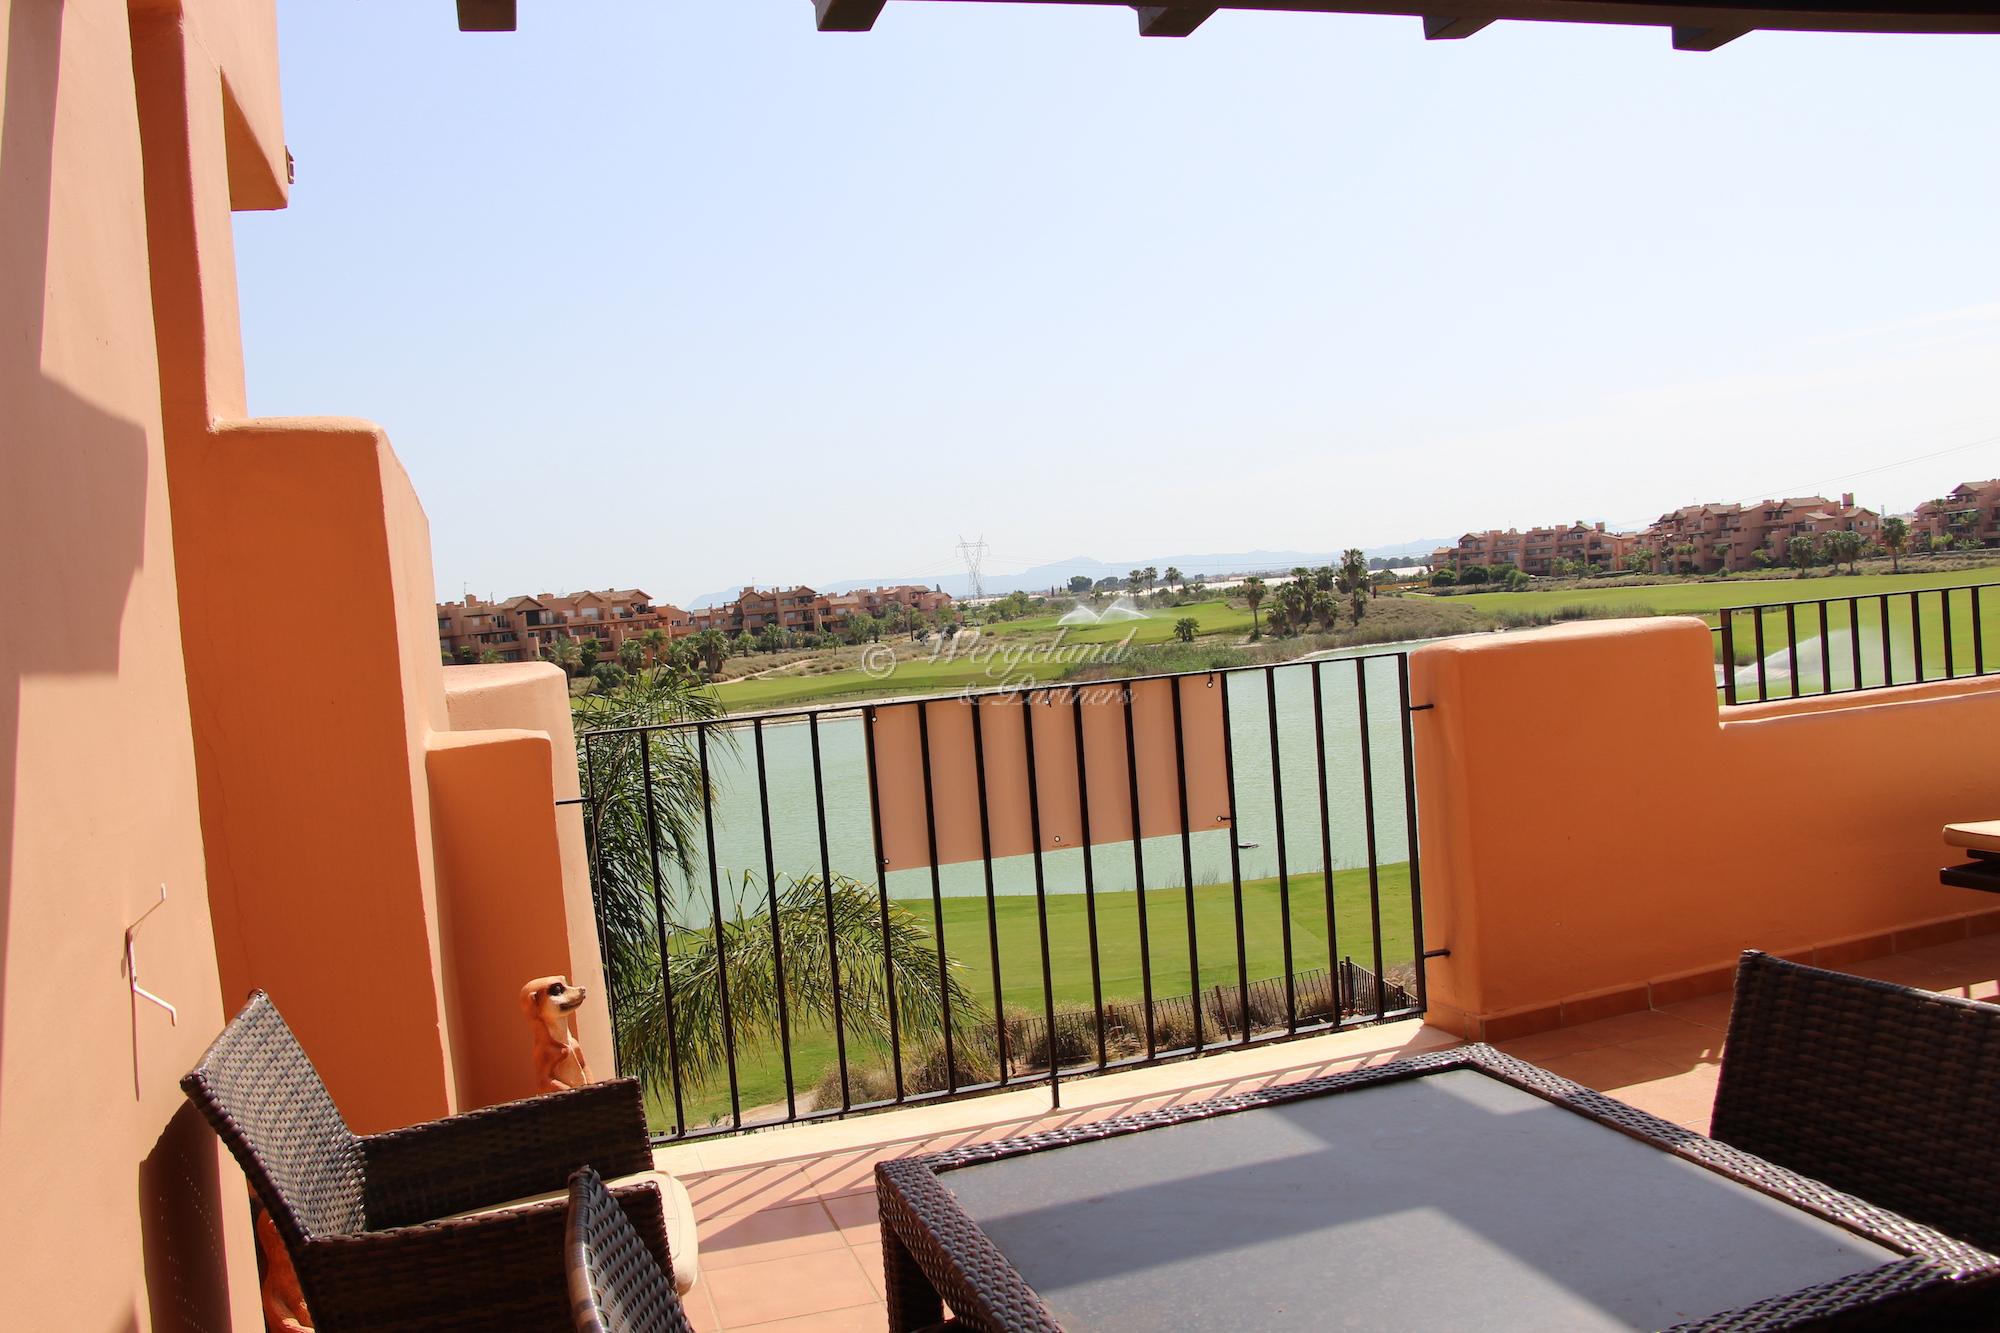 3 Bedrooms furnished southwest corner apartment, 2nd floor (top floor) 1. line golf by the lake [7422]